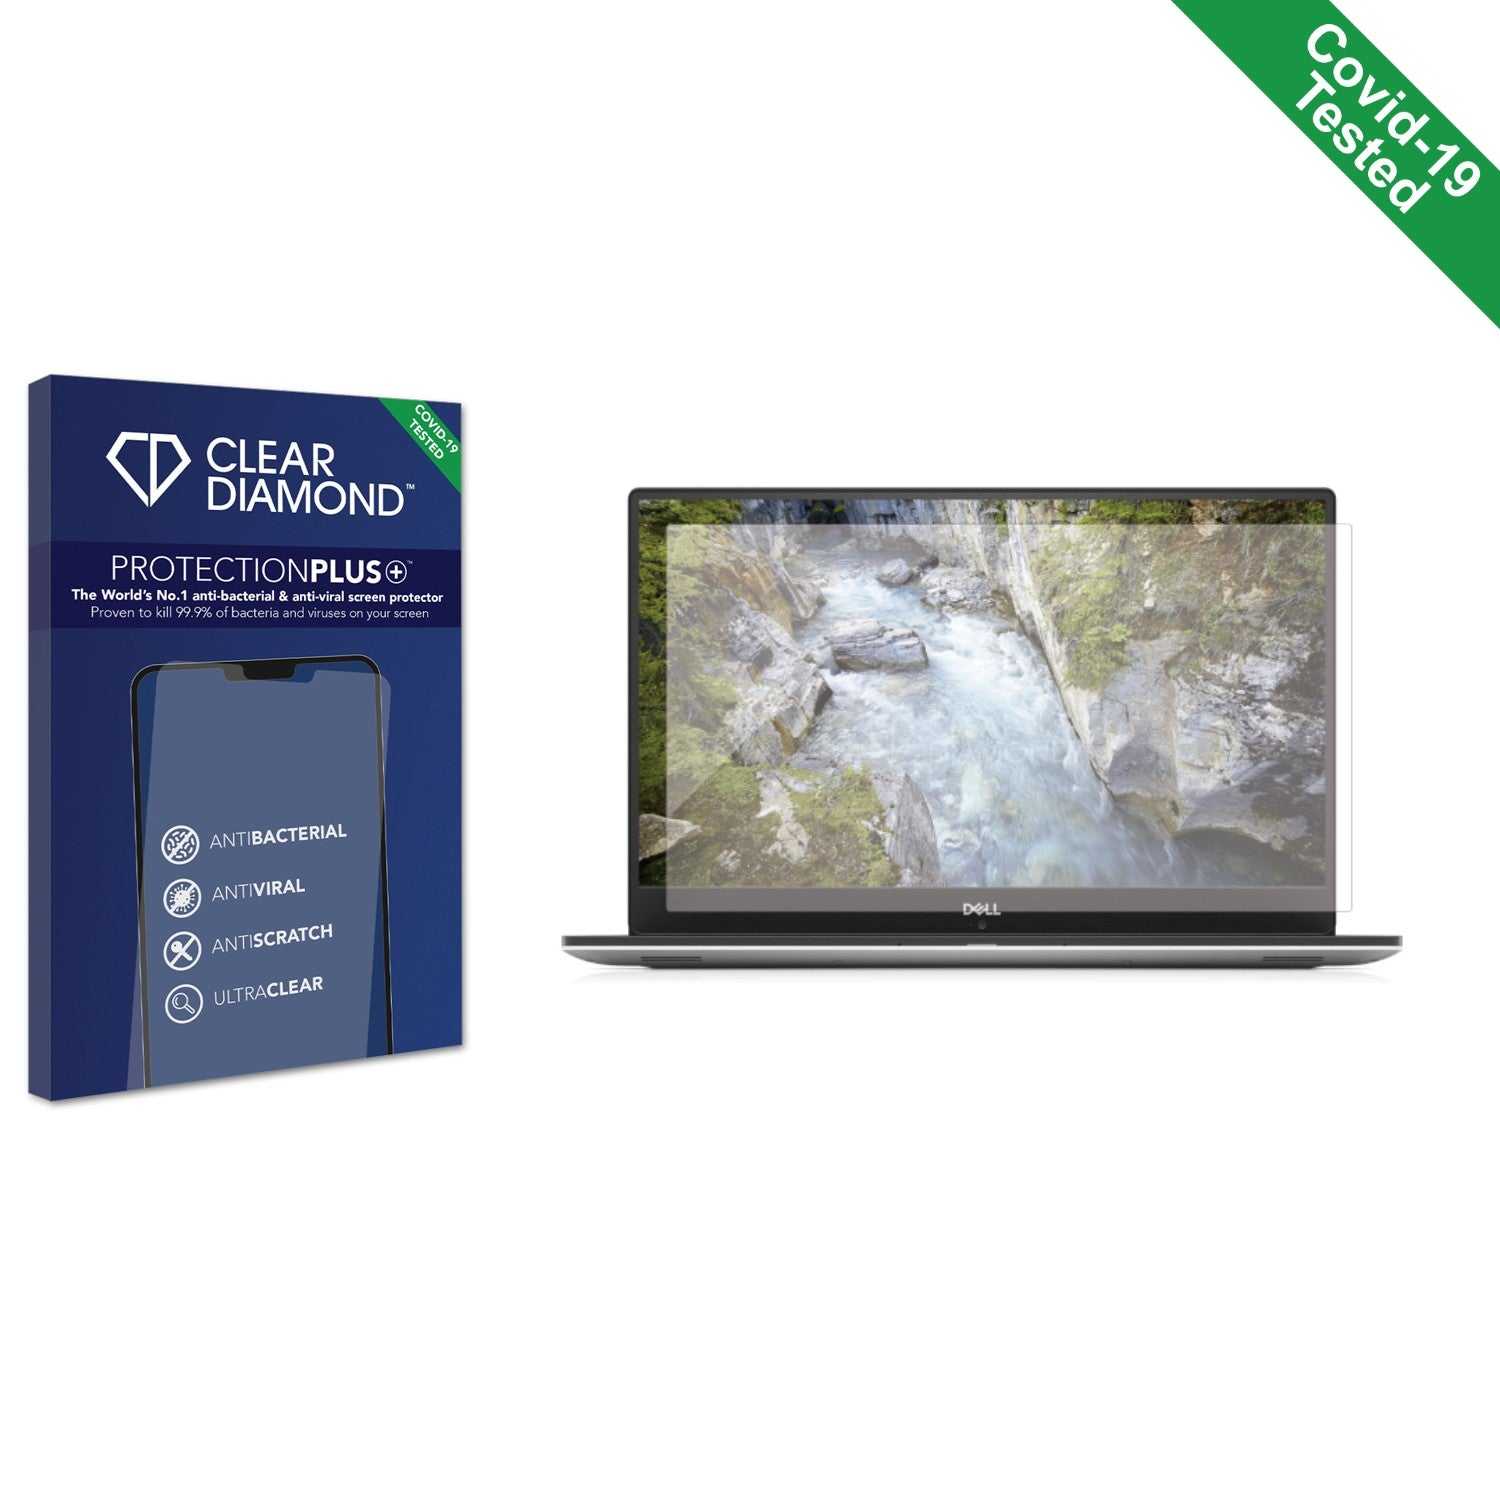 ScreenShield, Clear Diamond Anti-viral Screen Protector for Dell XPS 15 9570 Non-Touch